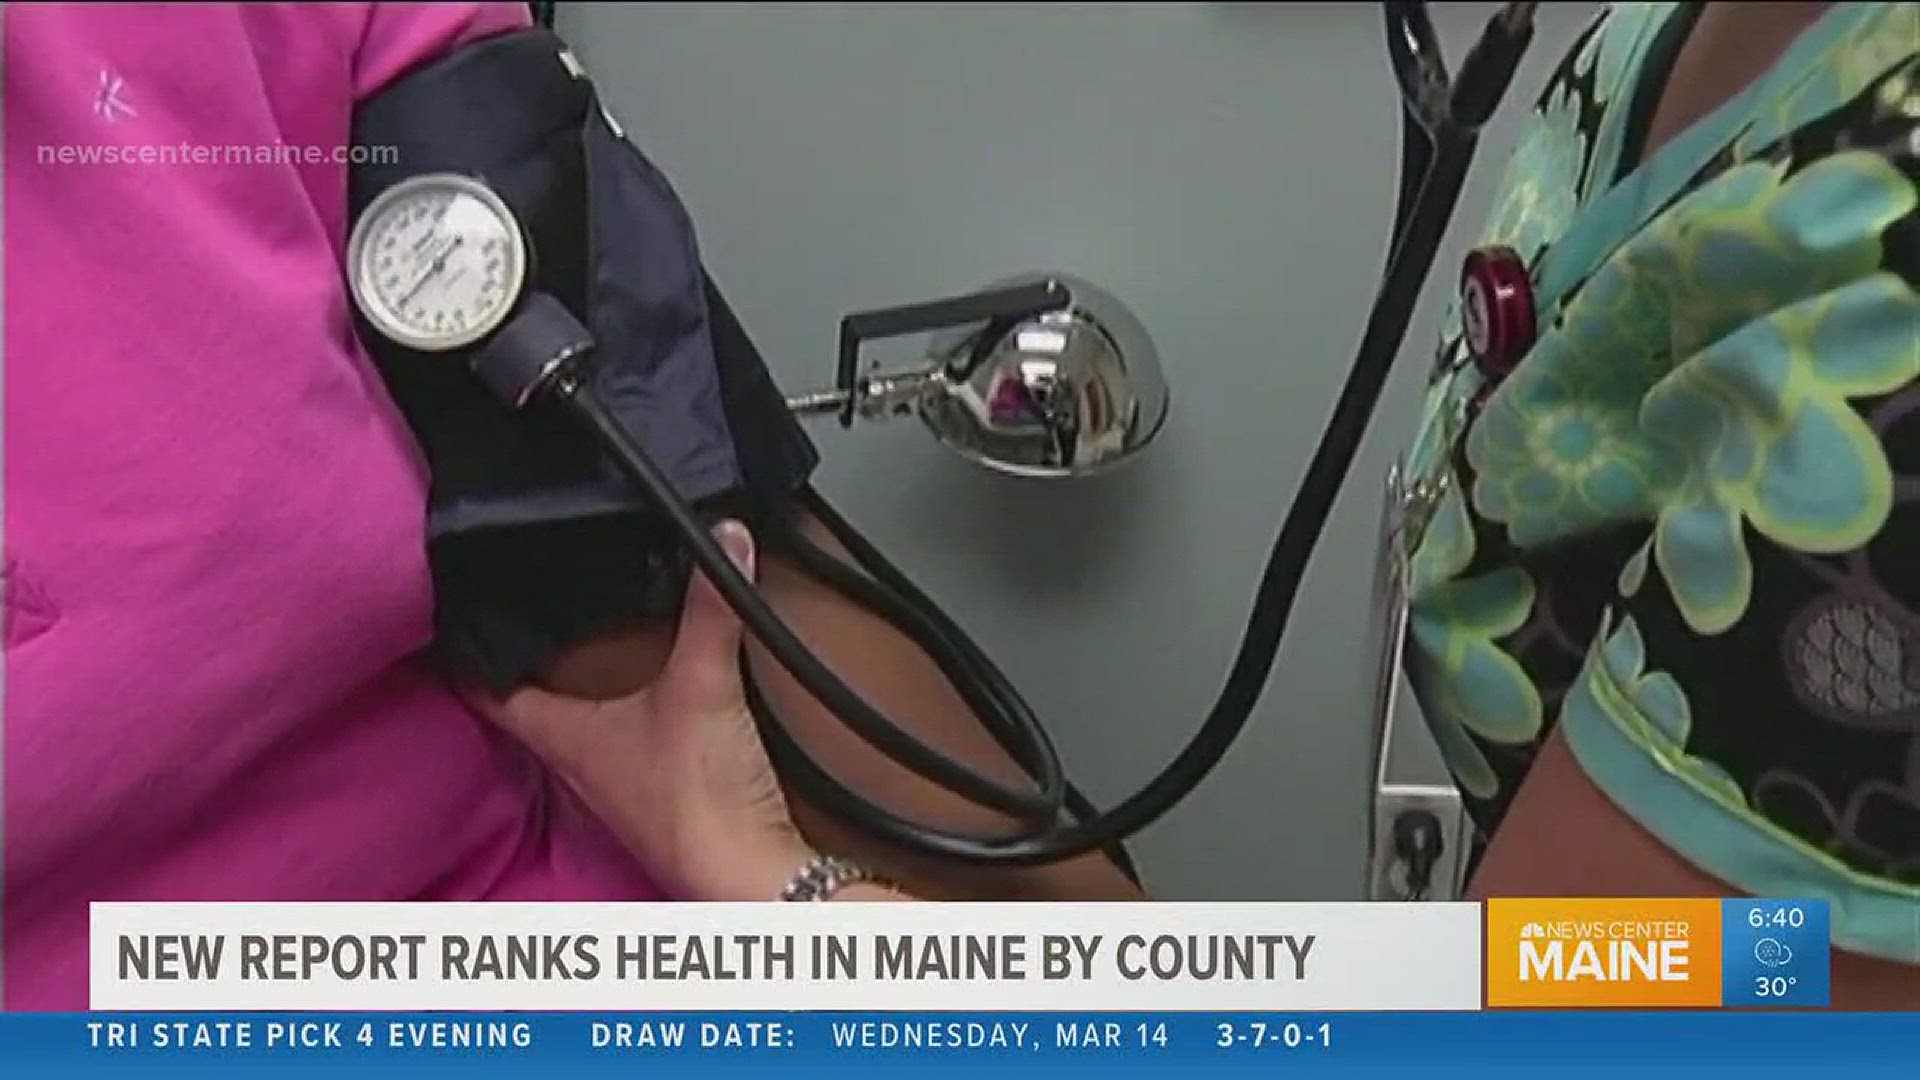 Do you live in the healthiest county in Maine?